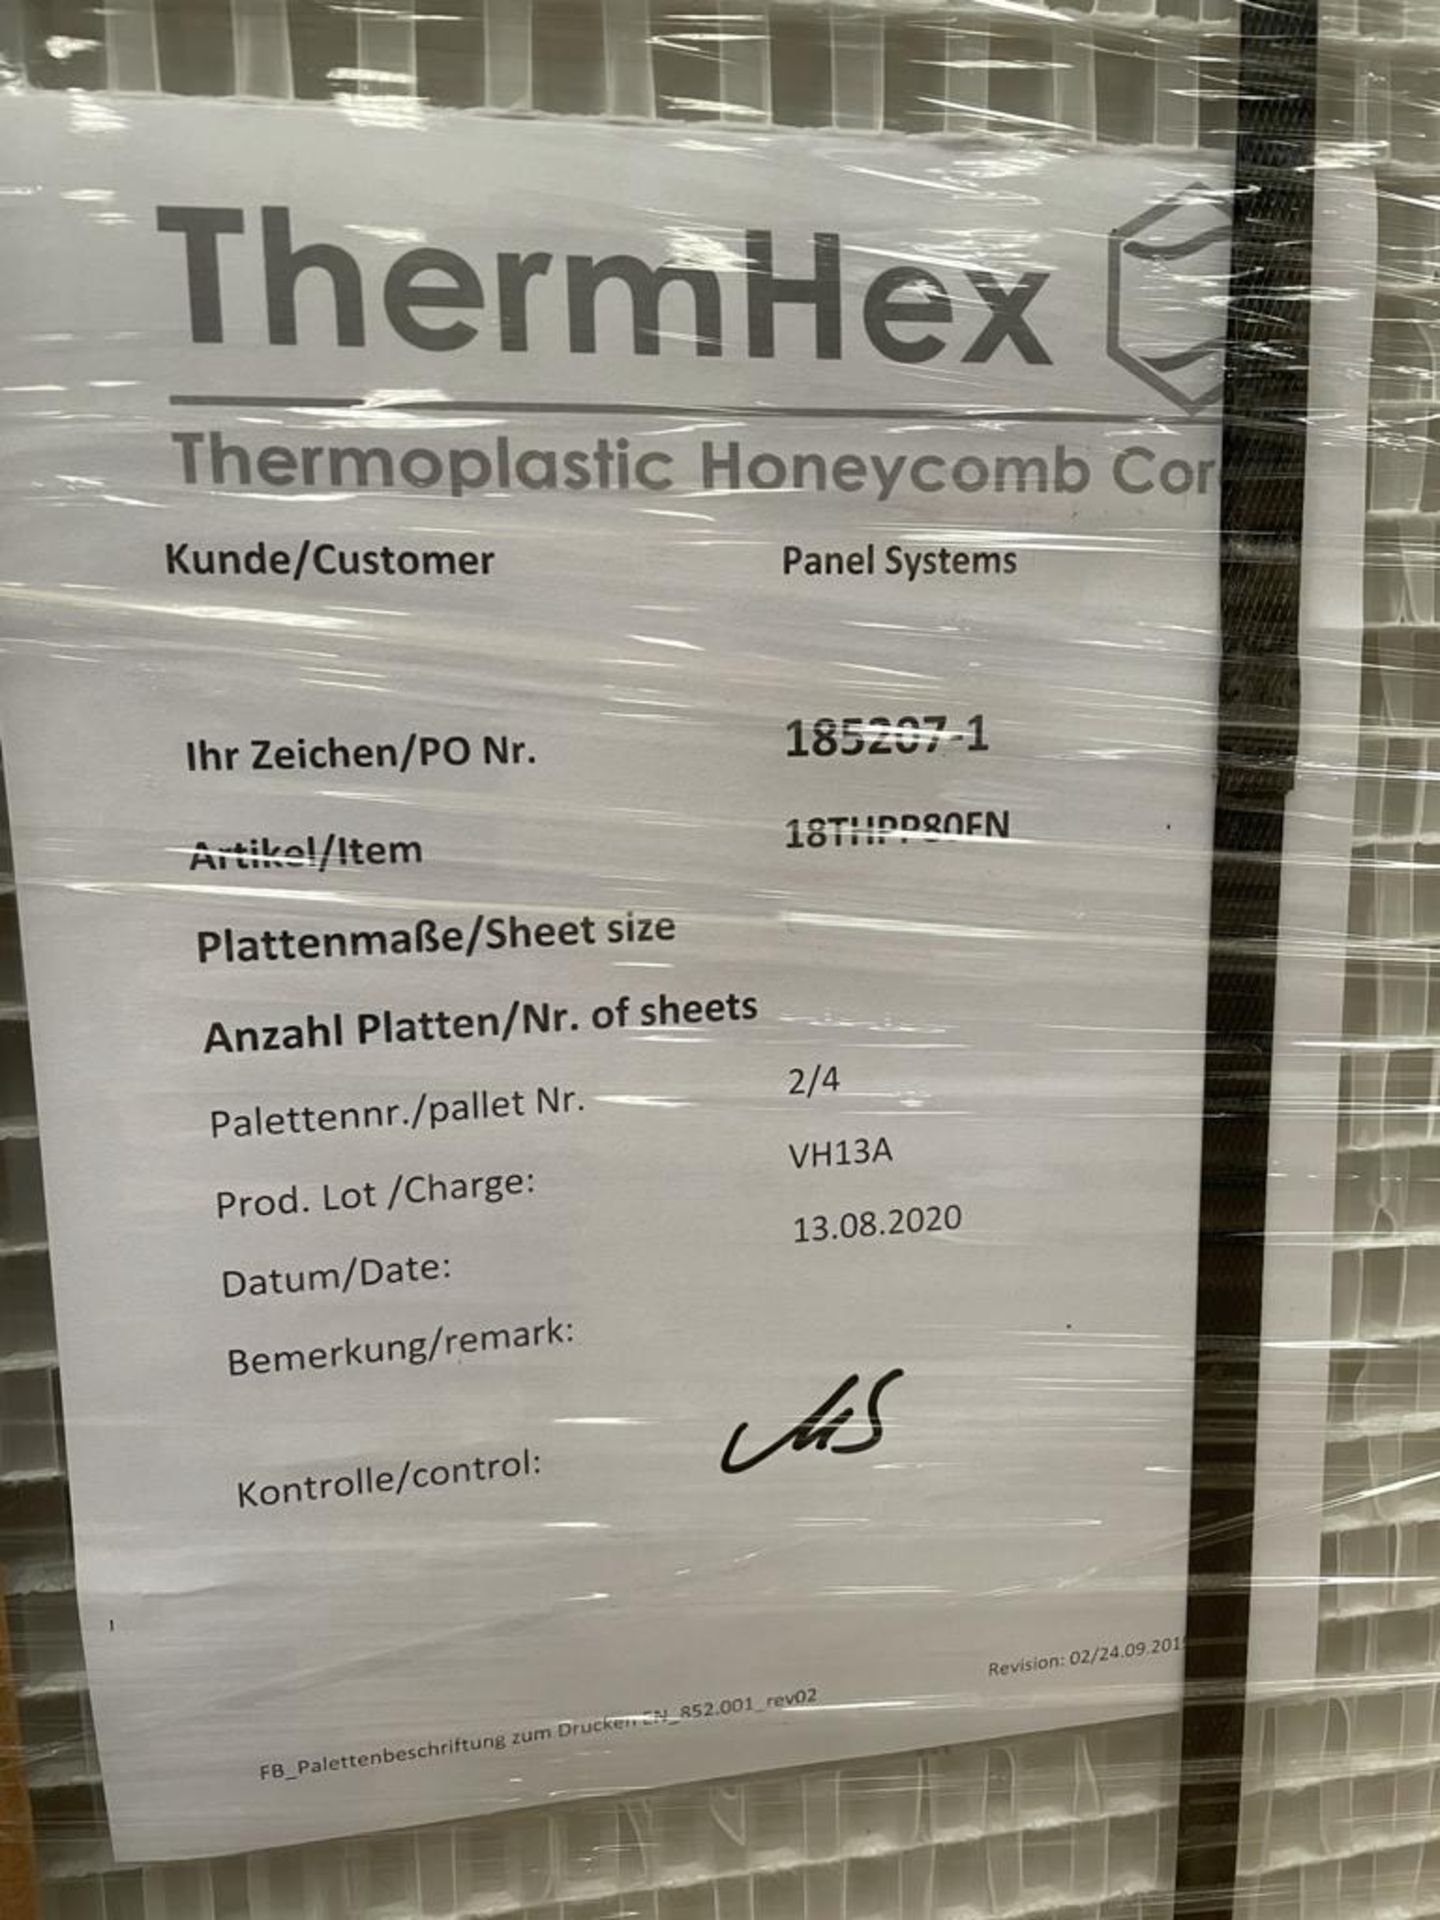 5 x ThermHex Thermoplastic Honeycomb Core Panels - Size 2630 x 1210 x 18mm - New Stock - Lightweight - Image 2 of 8